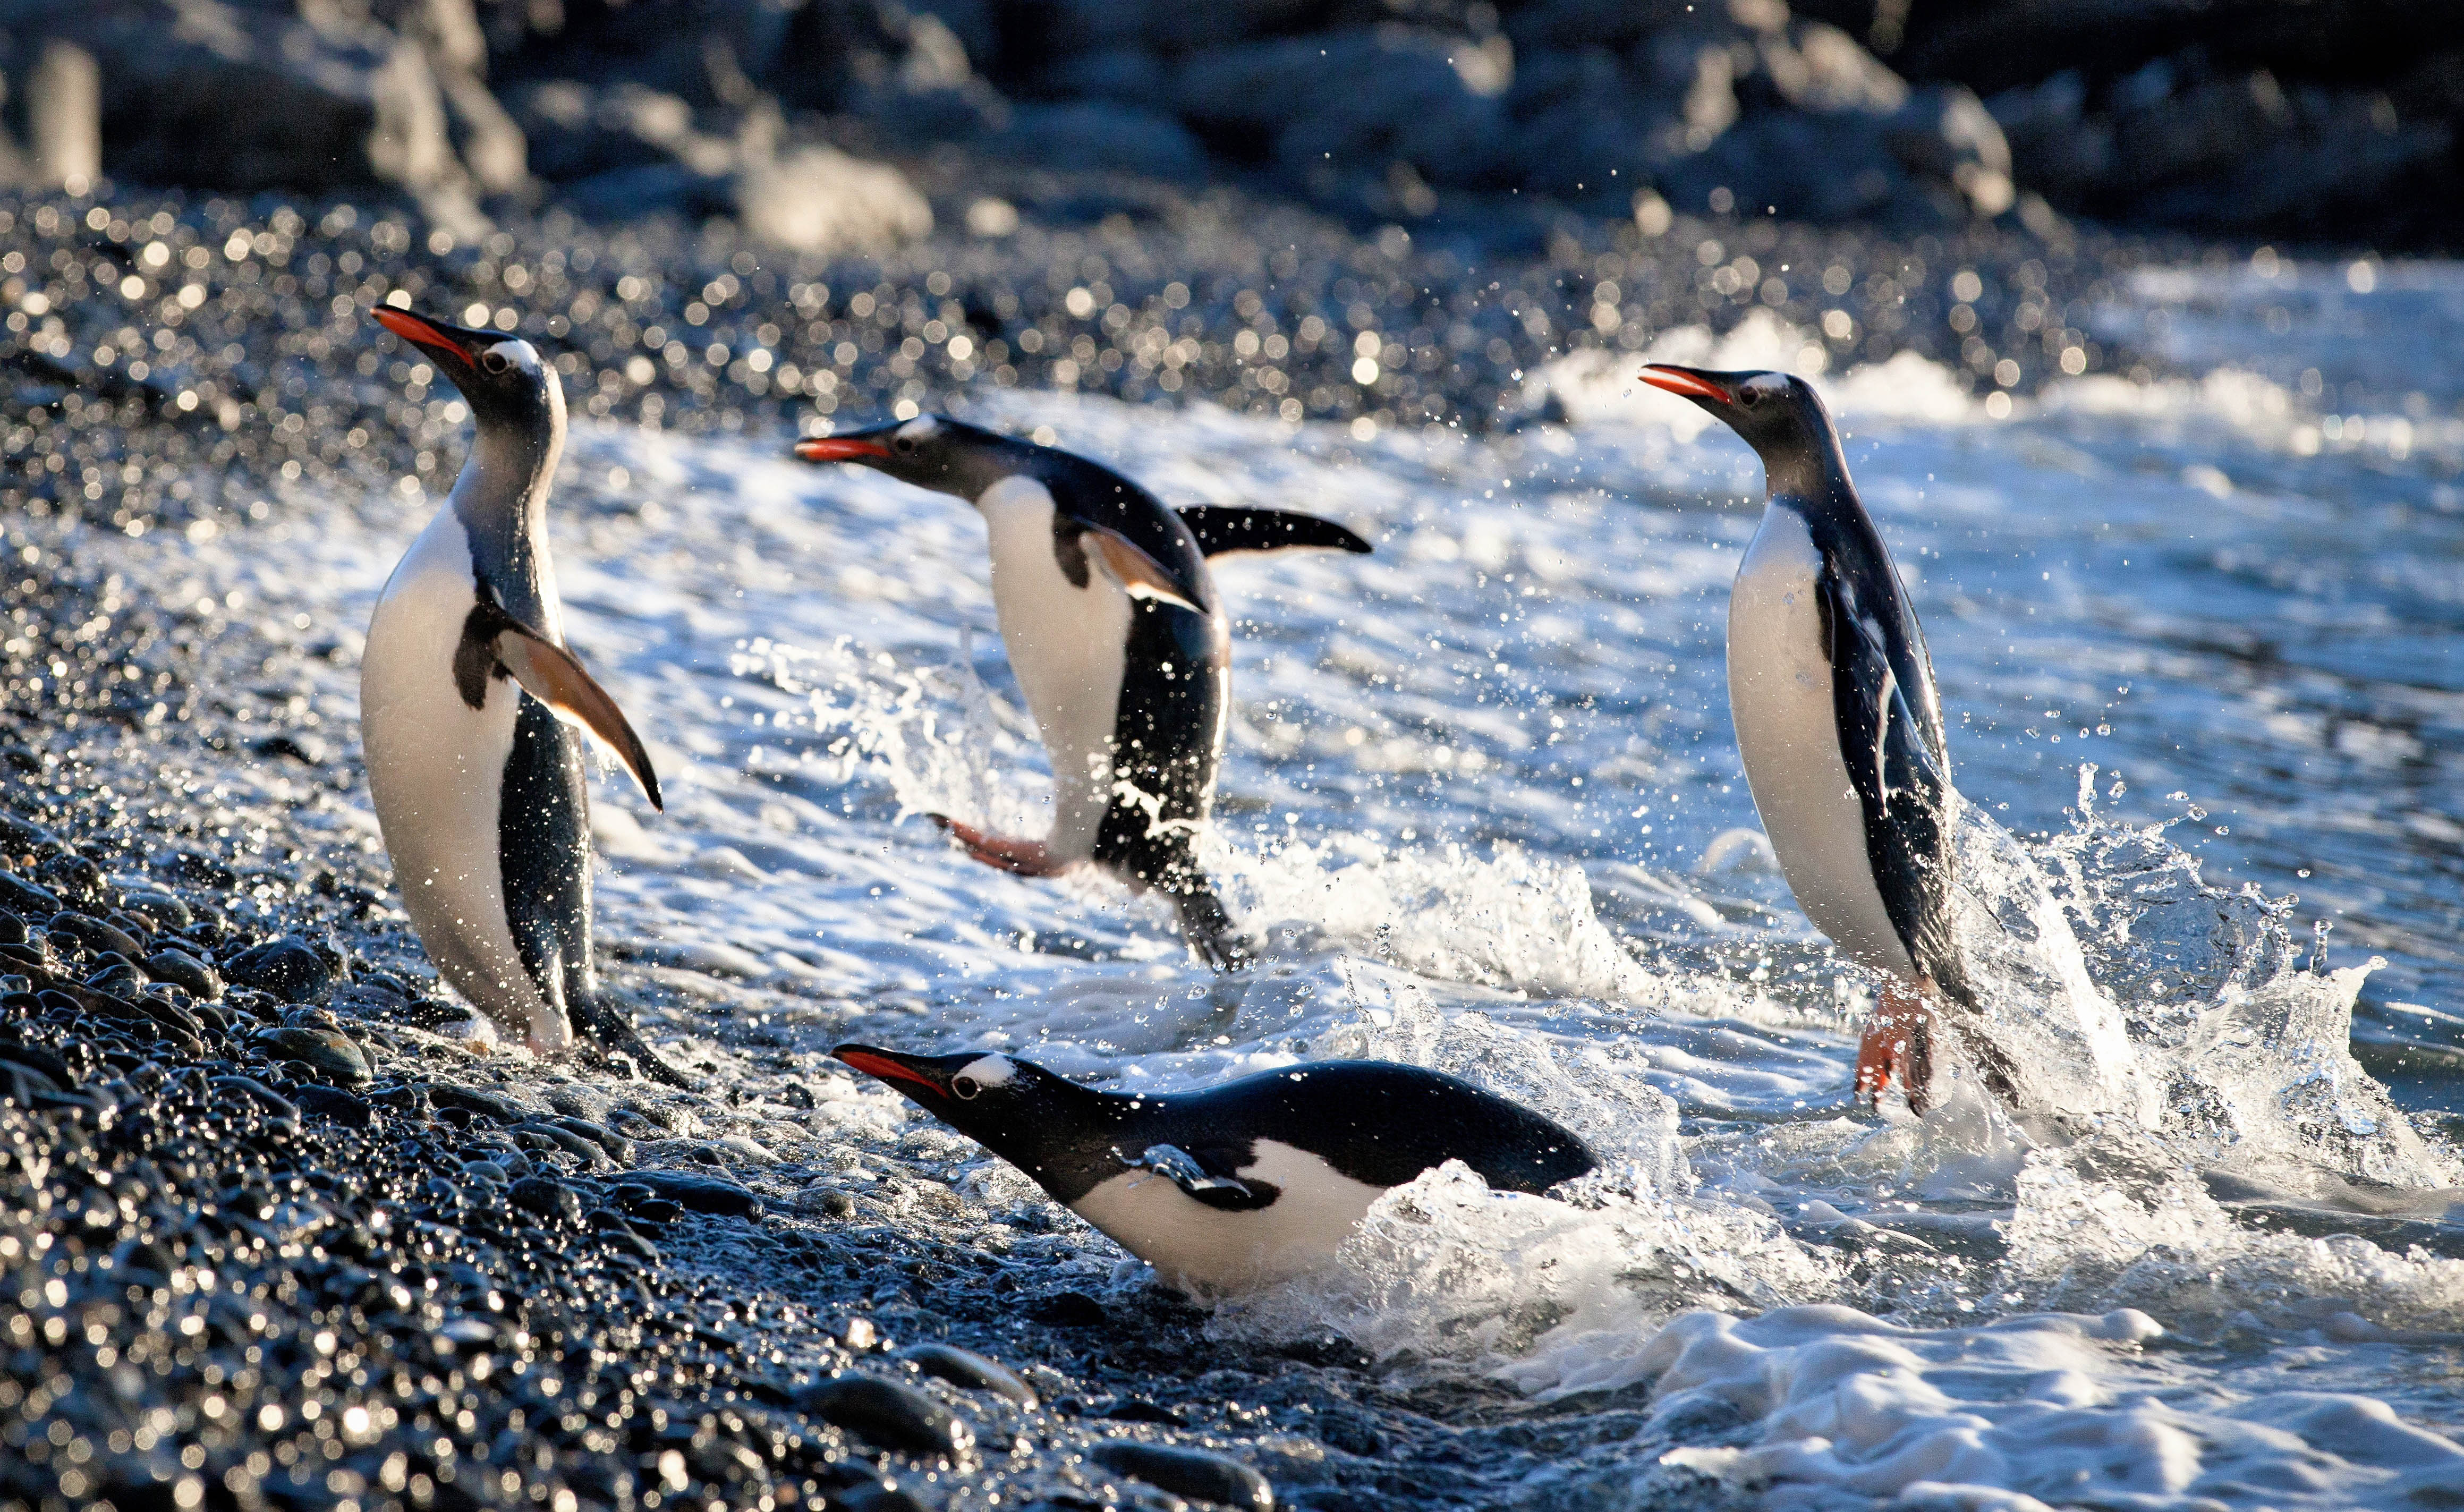 Gentoo penguins delight Quark passengers by porpoising out of the water in Antarctica.